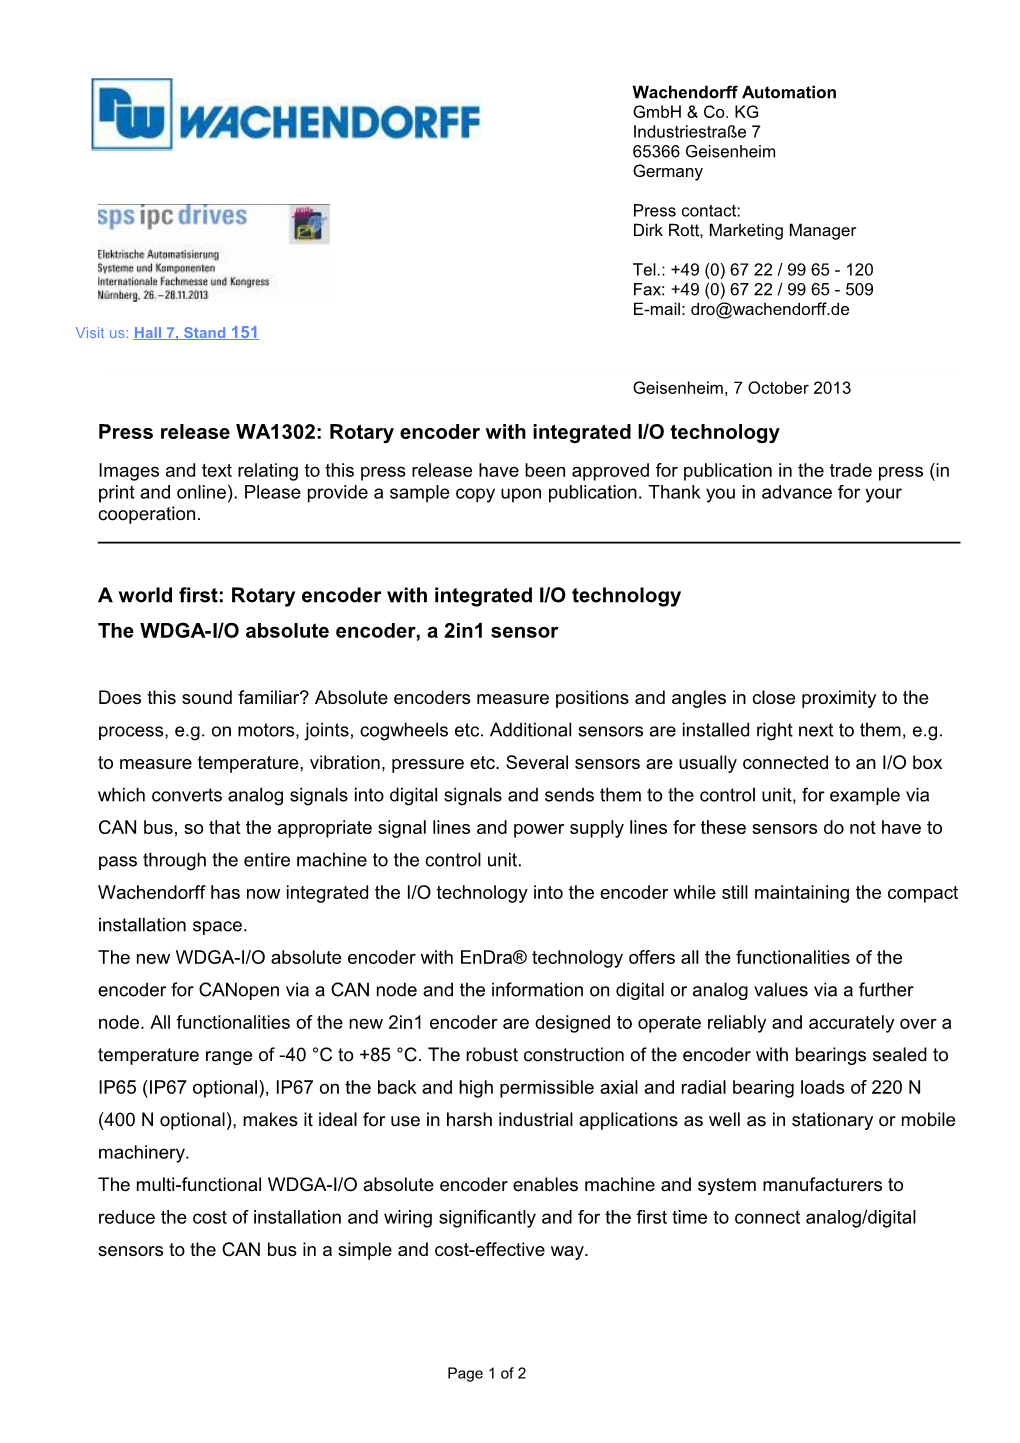 Press Release WA1302: Rotary Encoder with Integrated I/O Technology